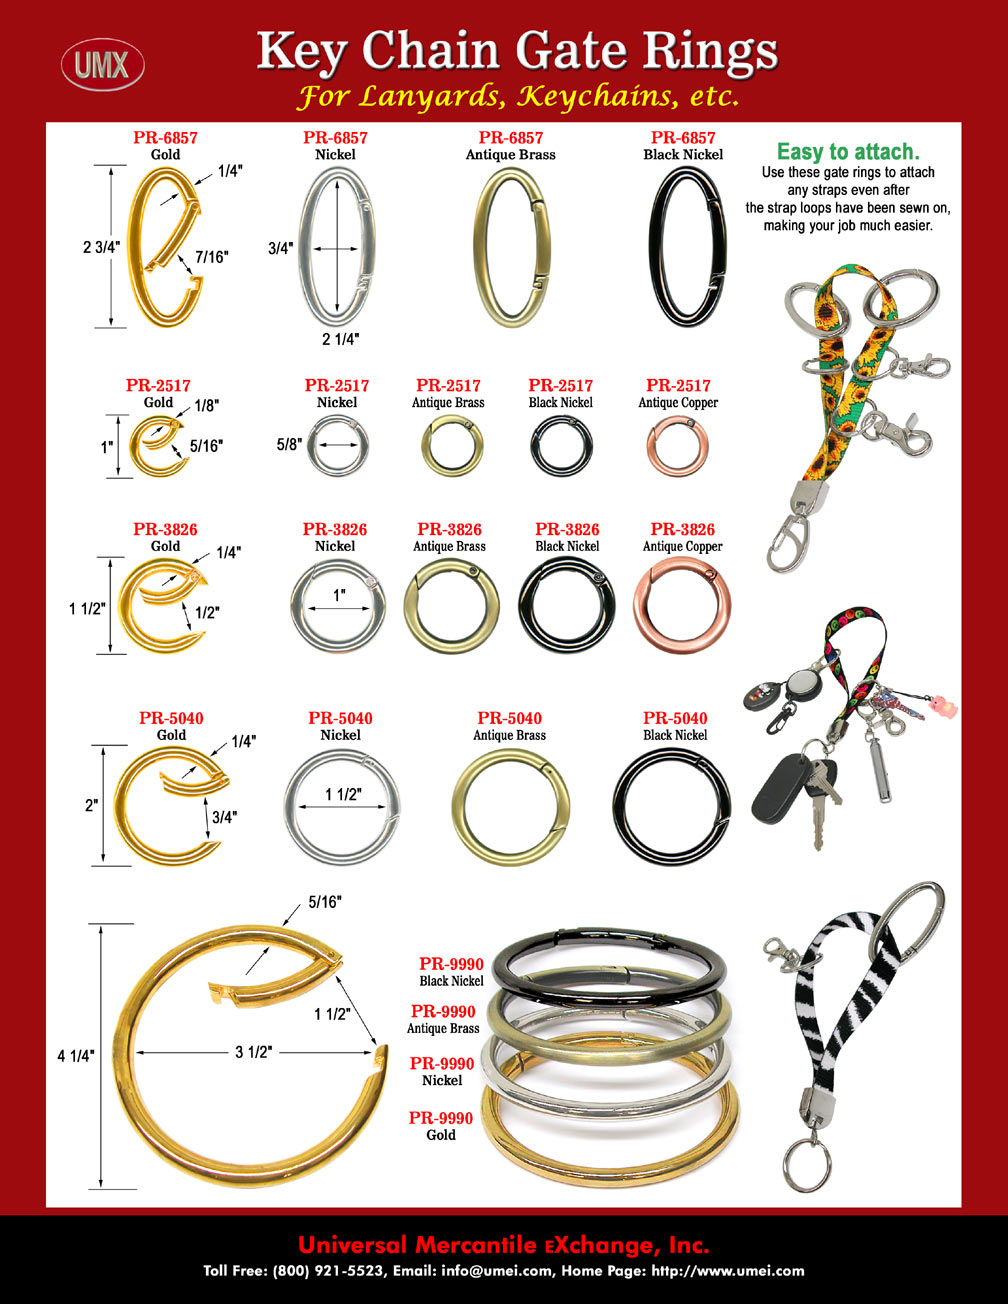 UMX Easy To Use and Multi-Function Key Chain Gate Rings For Key Holders